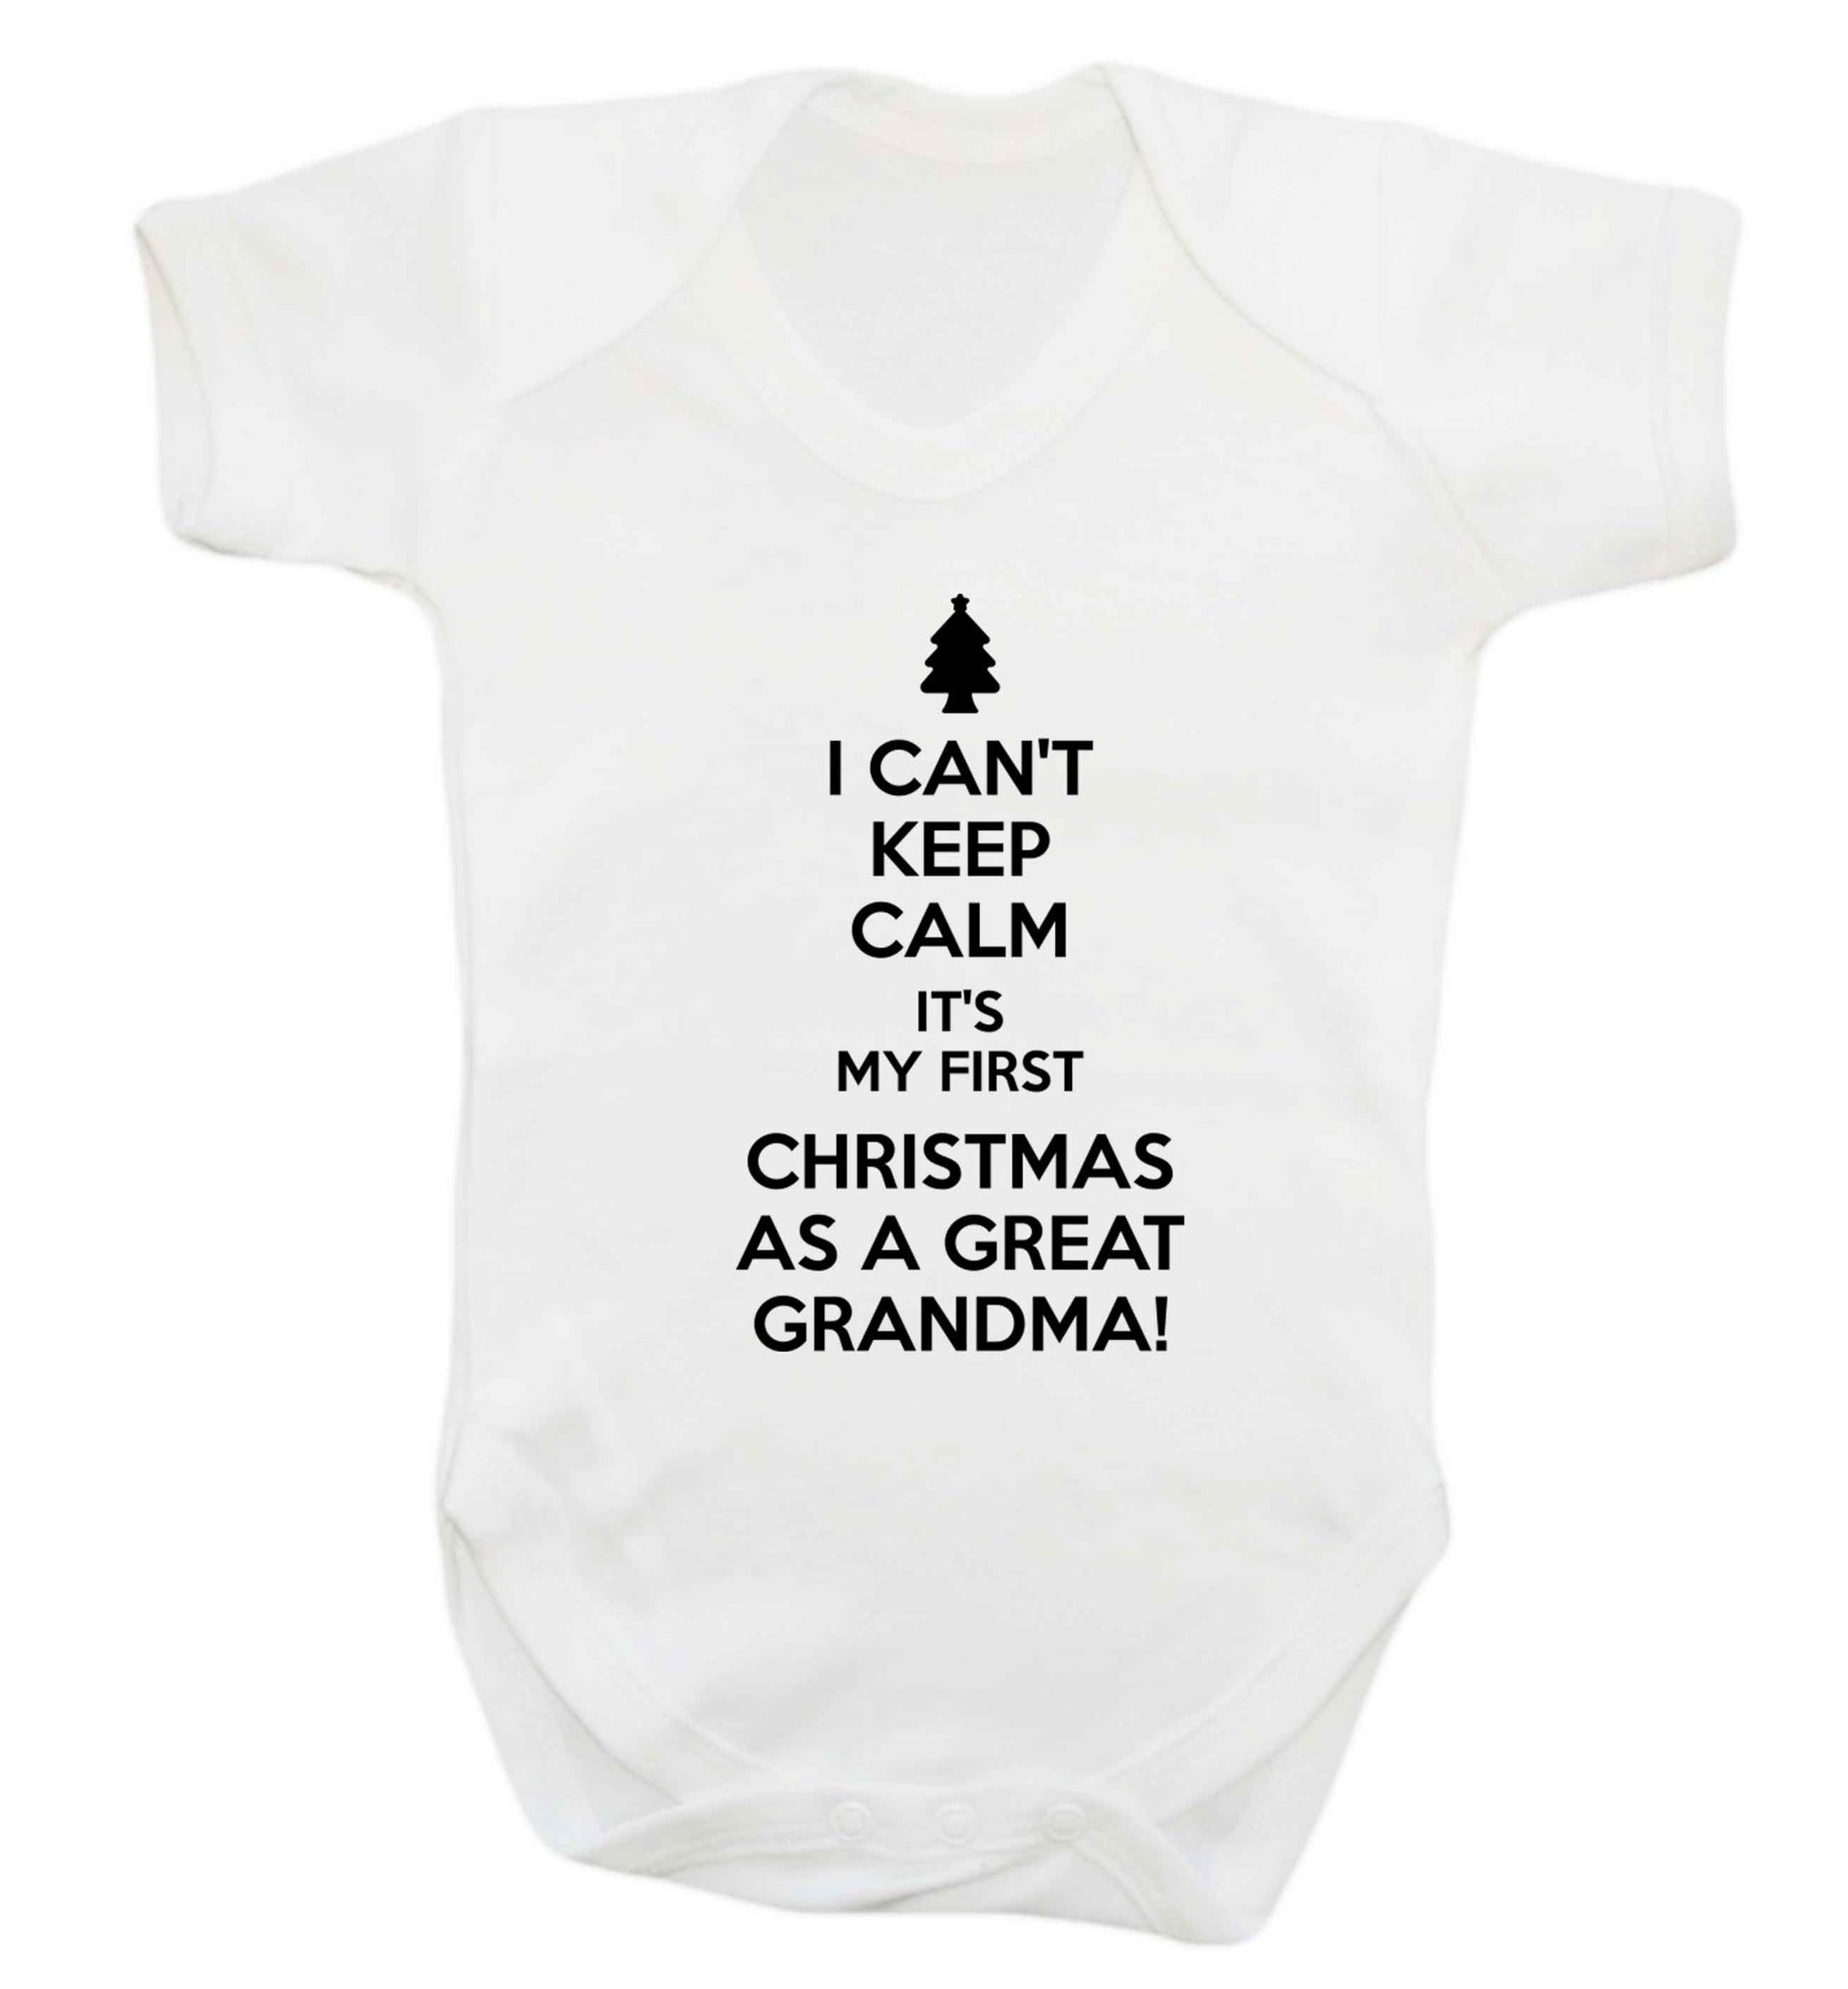 I can't keep calm it's my first Christmas as a great grandma! Baby Vest white 18-24 months